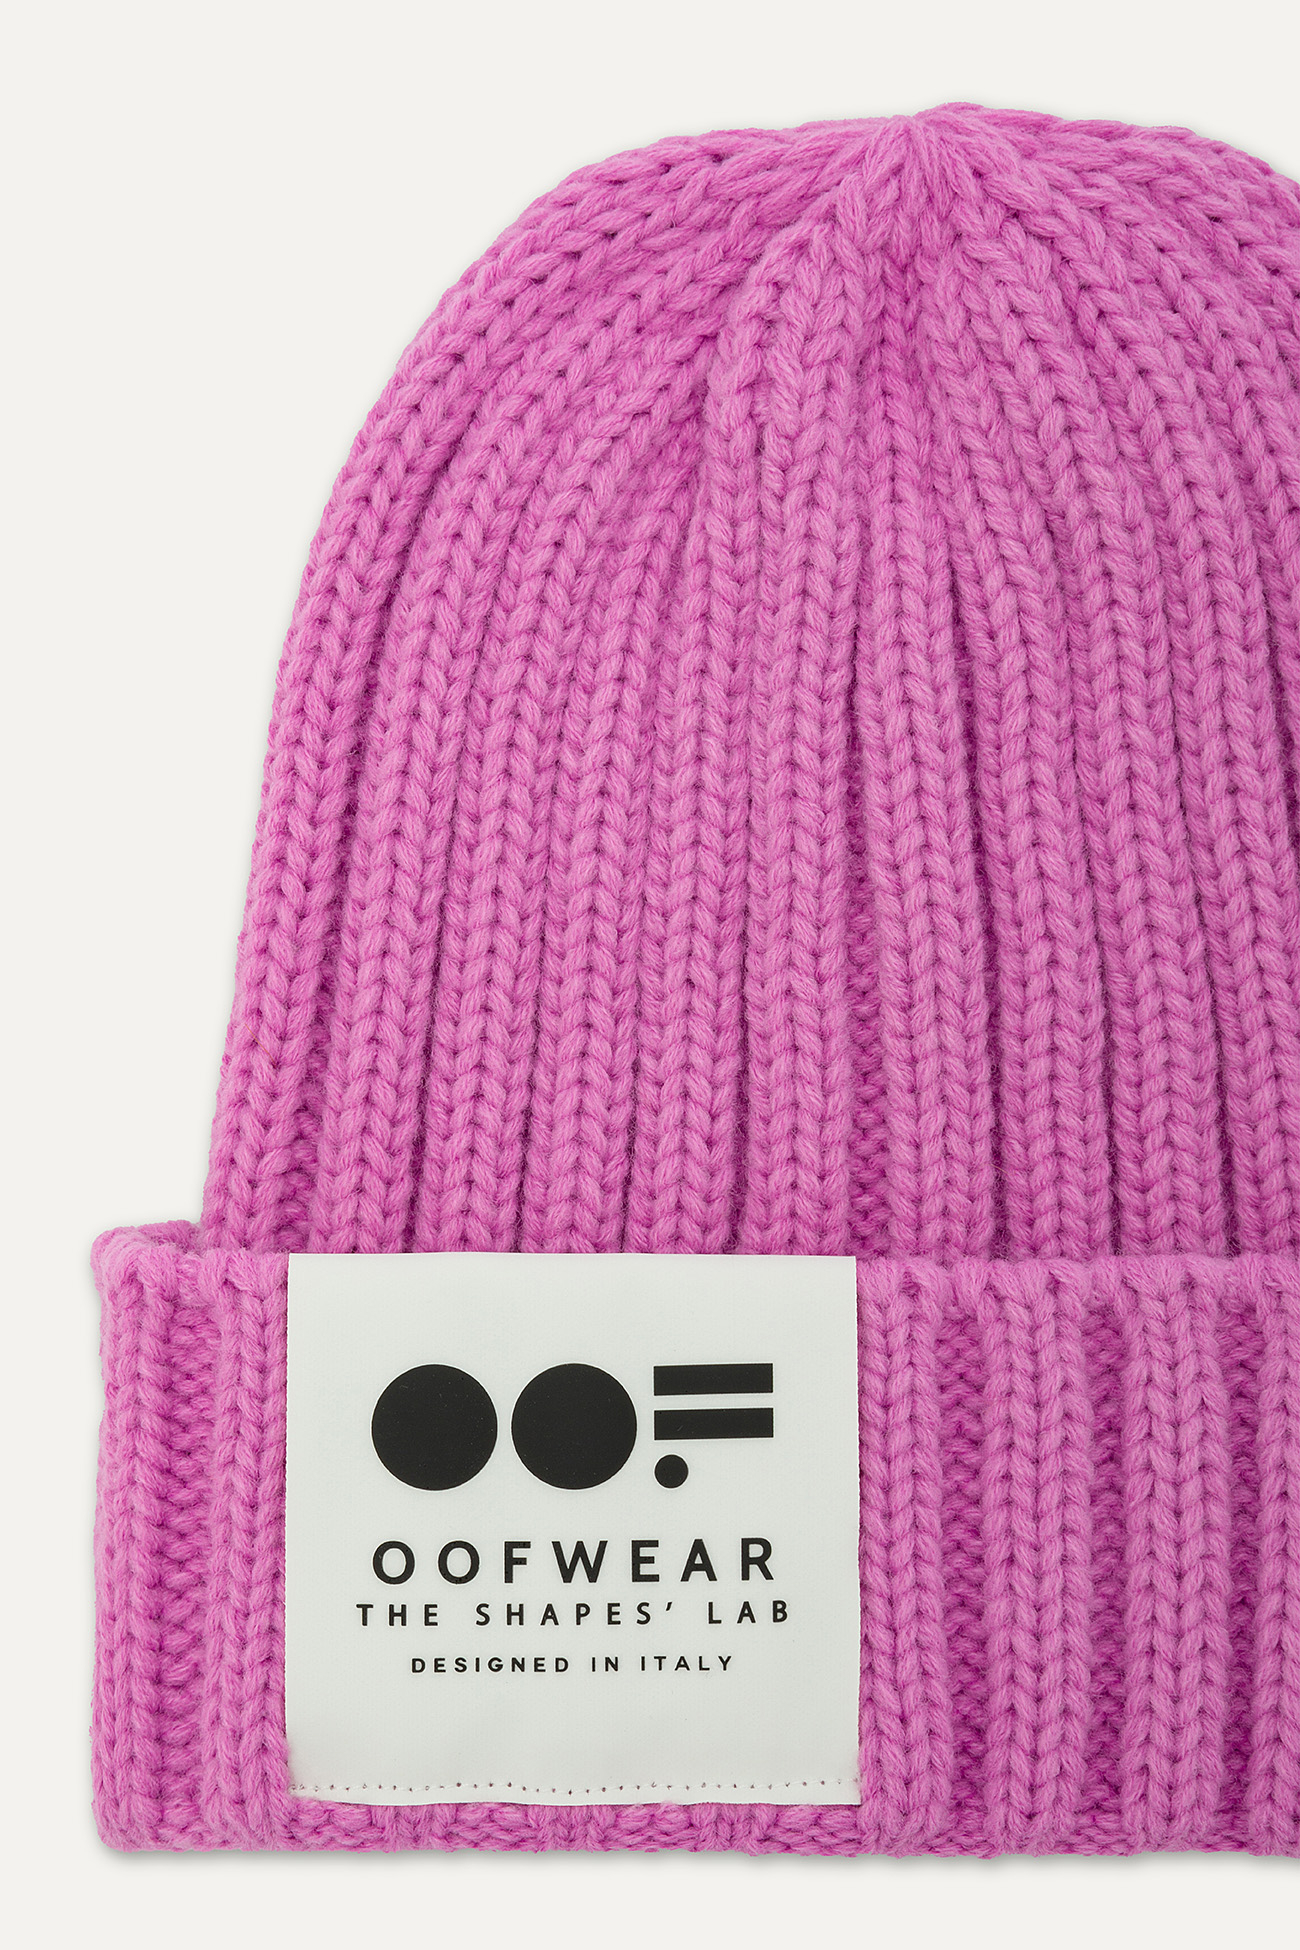 CAPPELLO CON FRONTINO IN ECO-MONTONE 2014 - CANDY - OOF WEAR